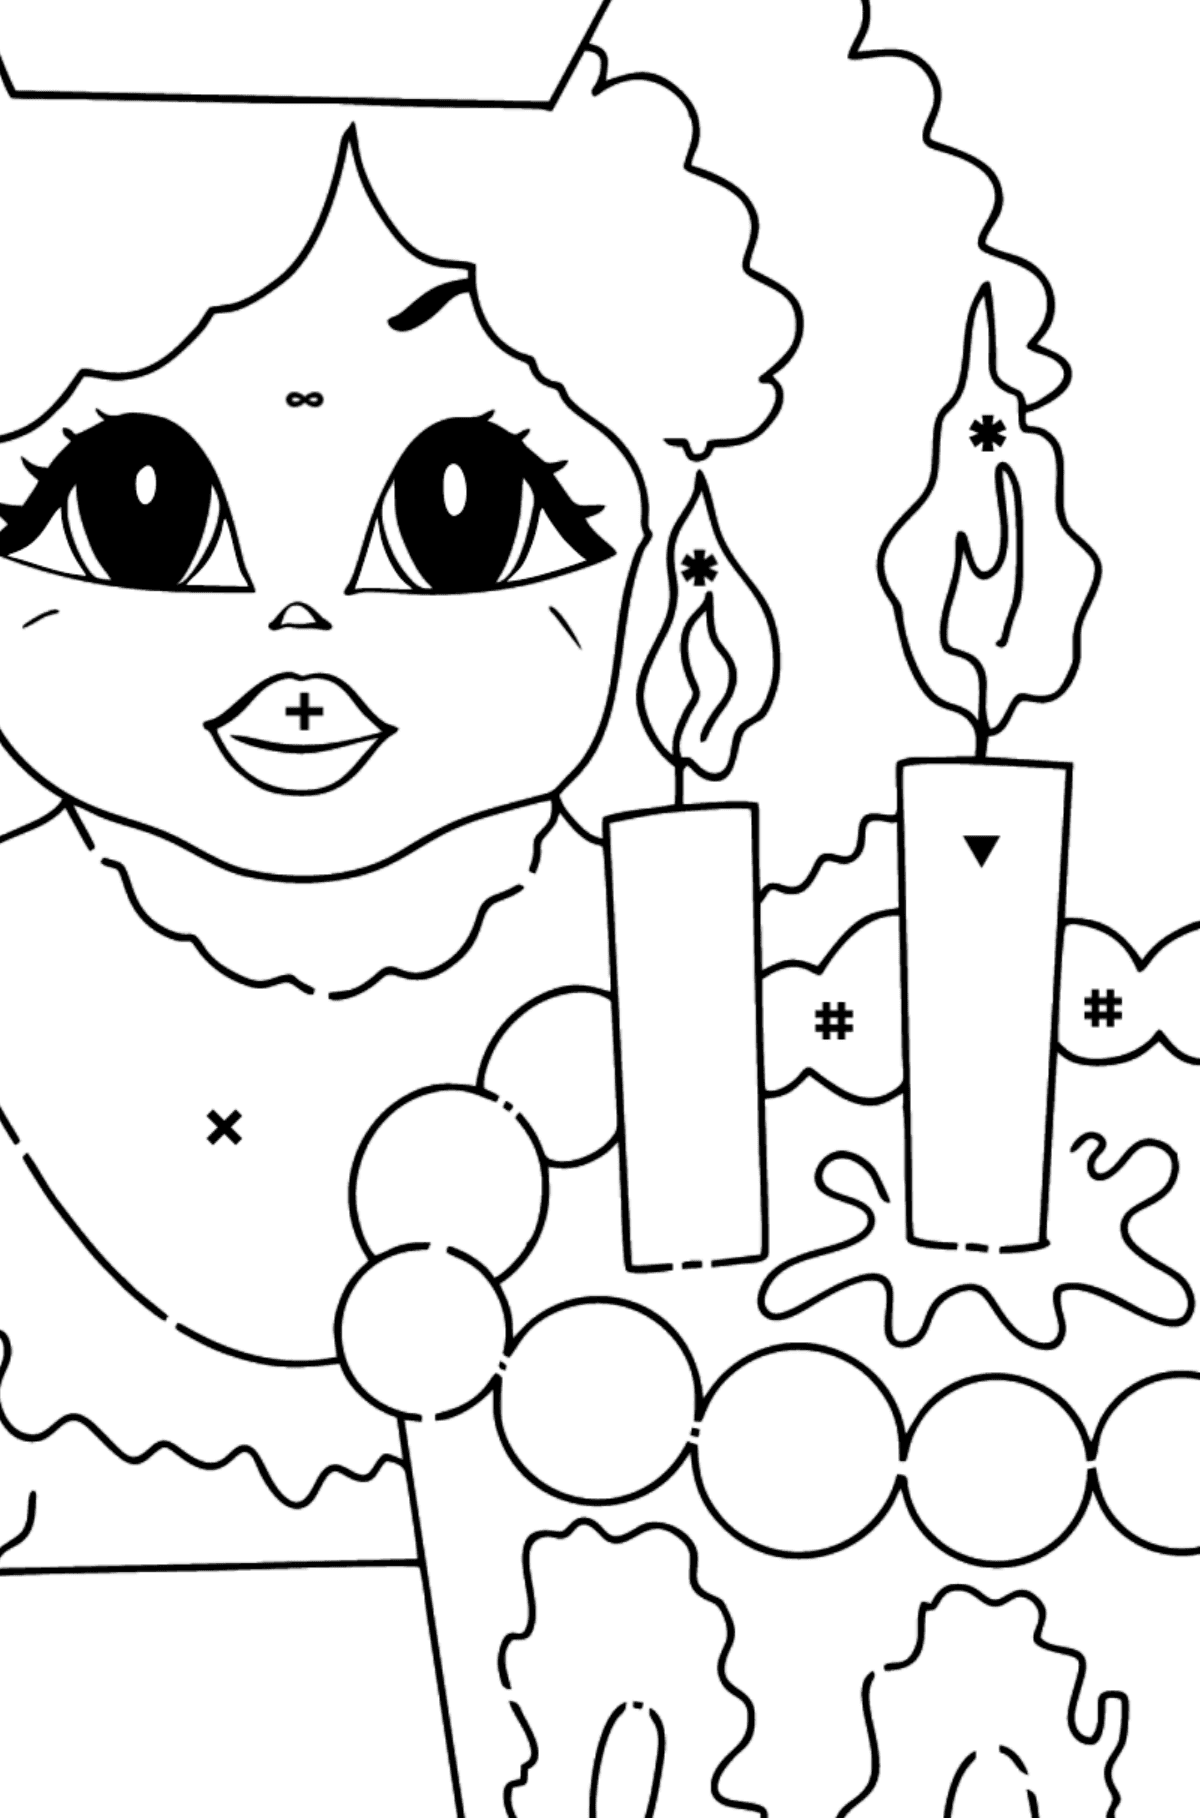 Coloring Page - A Princess with Cake - For Girls - Coloring by Symbols for Kids